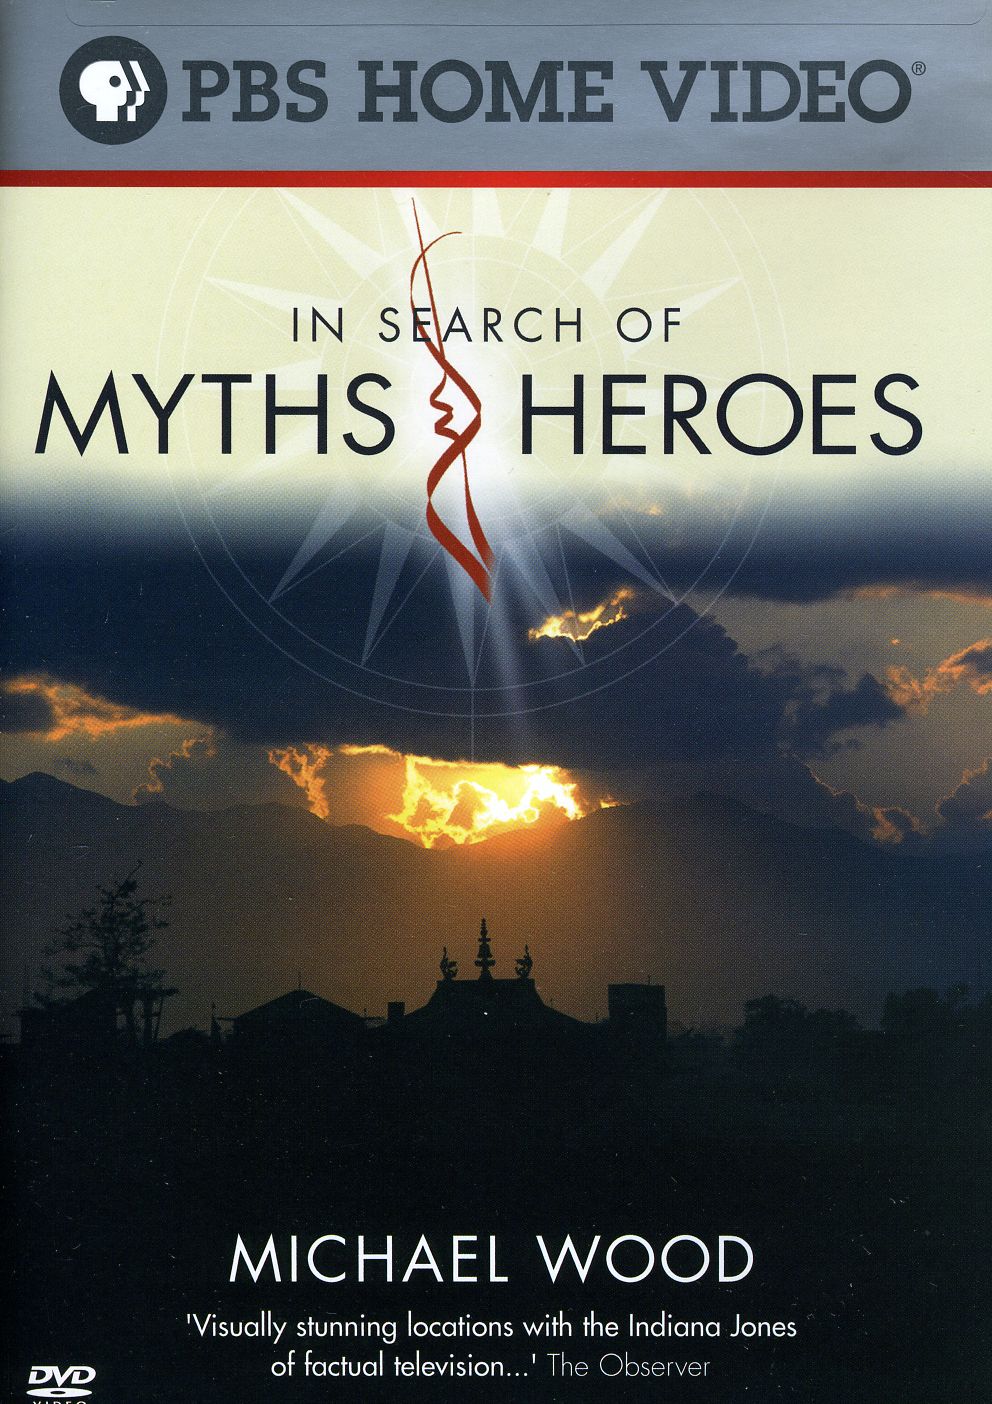 MICHAEL WOOD: IN SEARCH OF MYTHS & HEROES